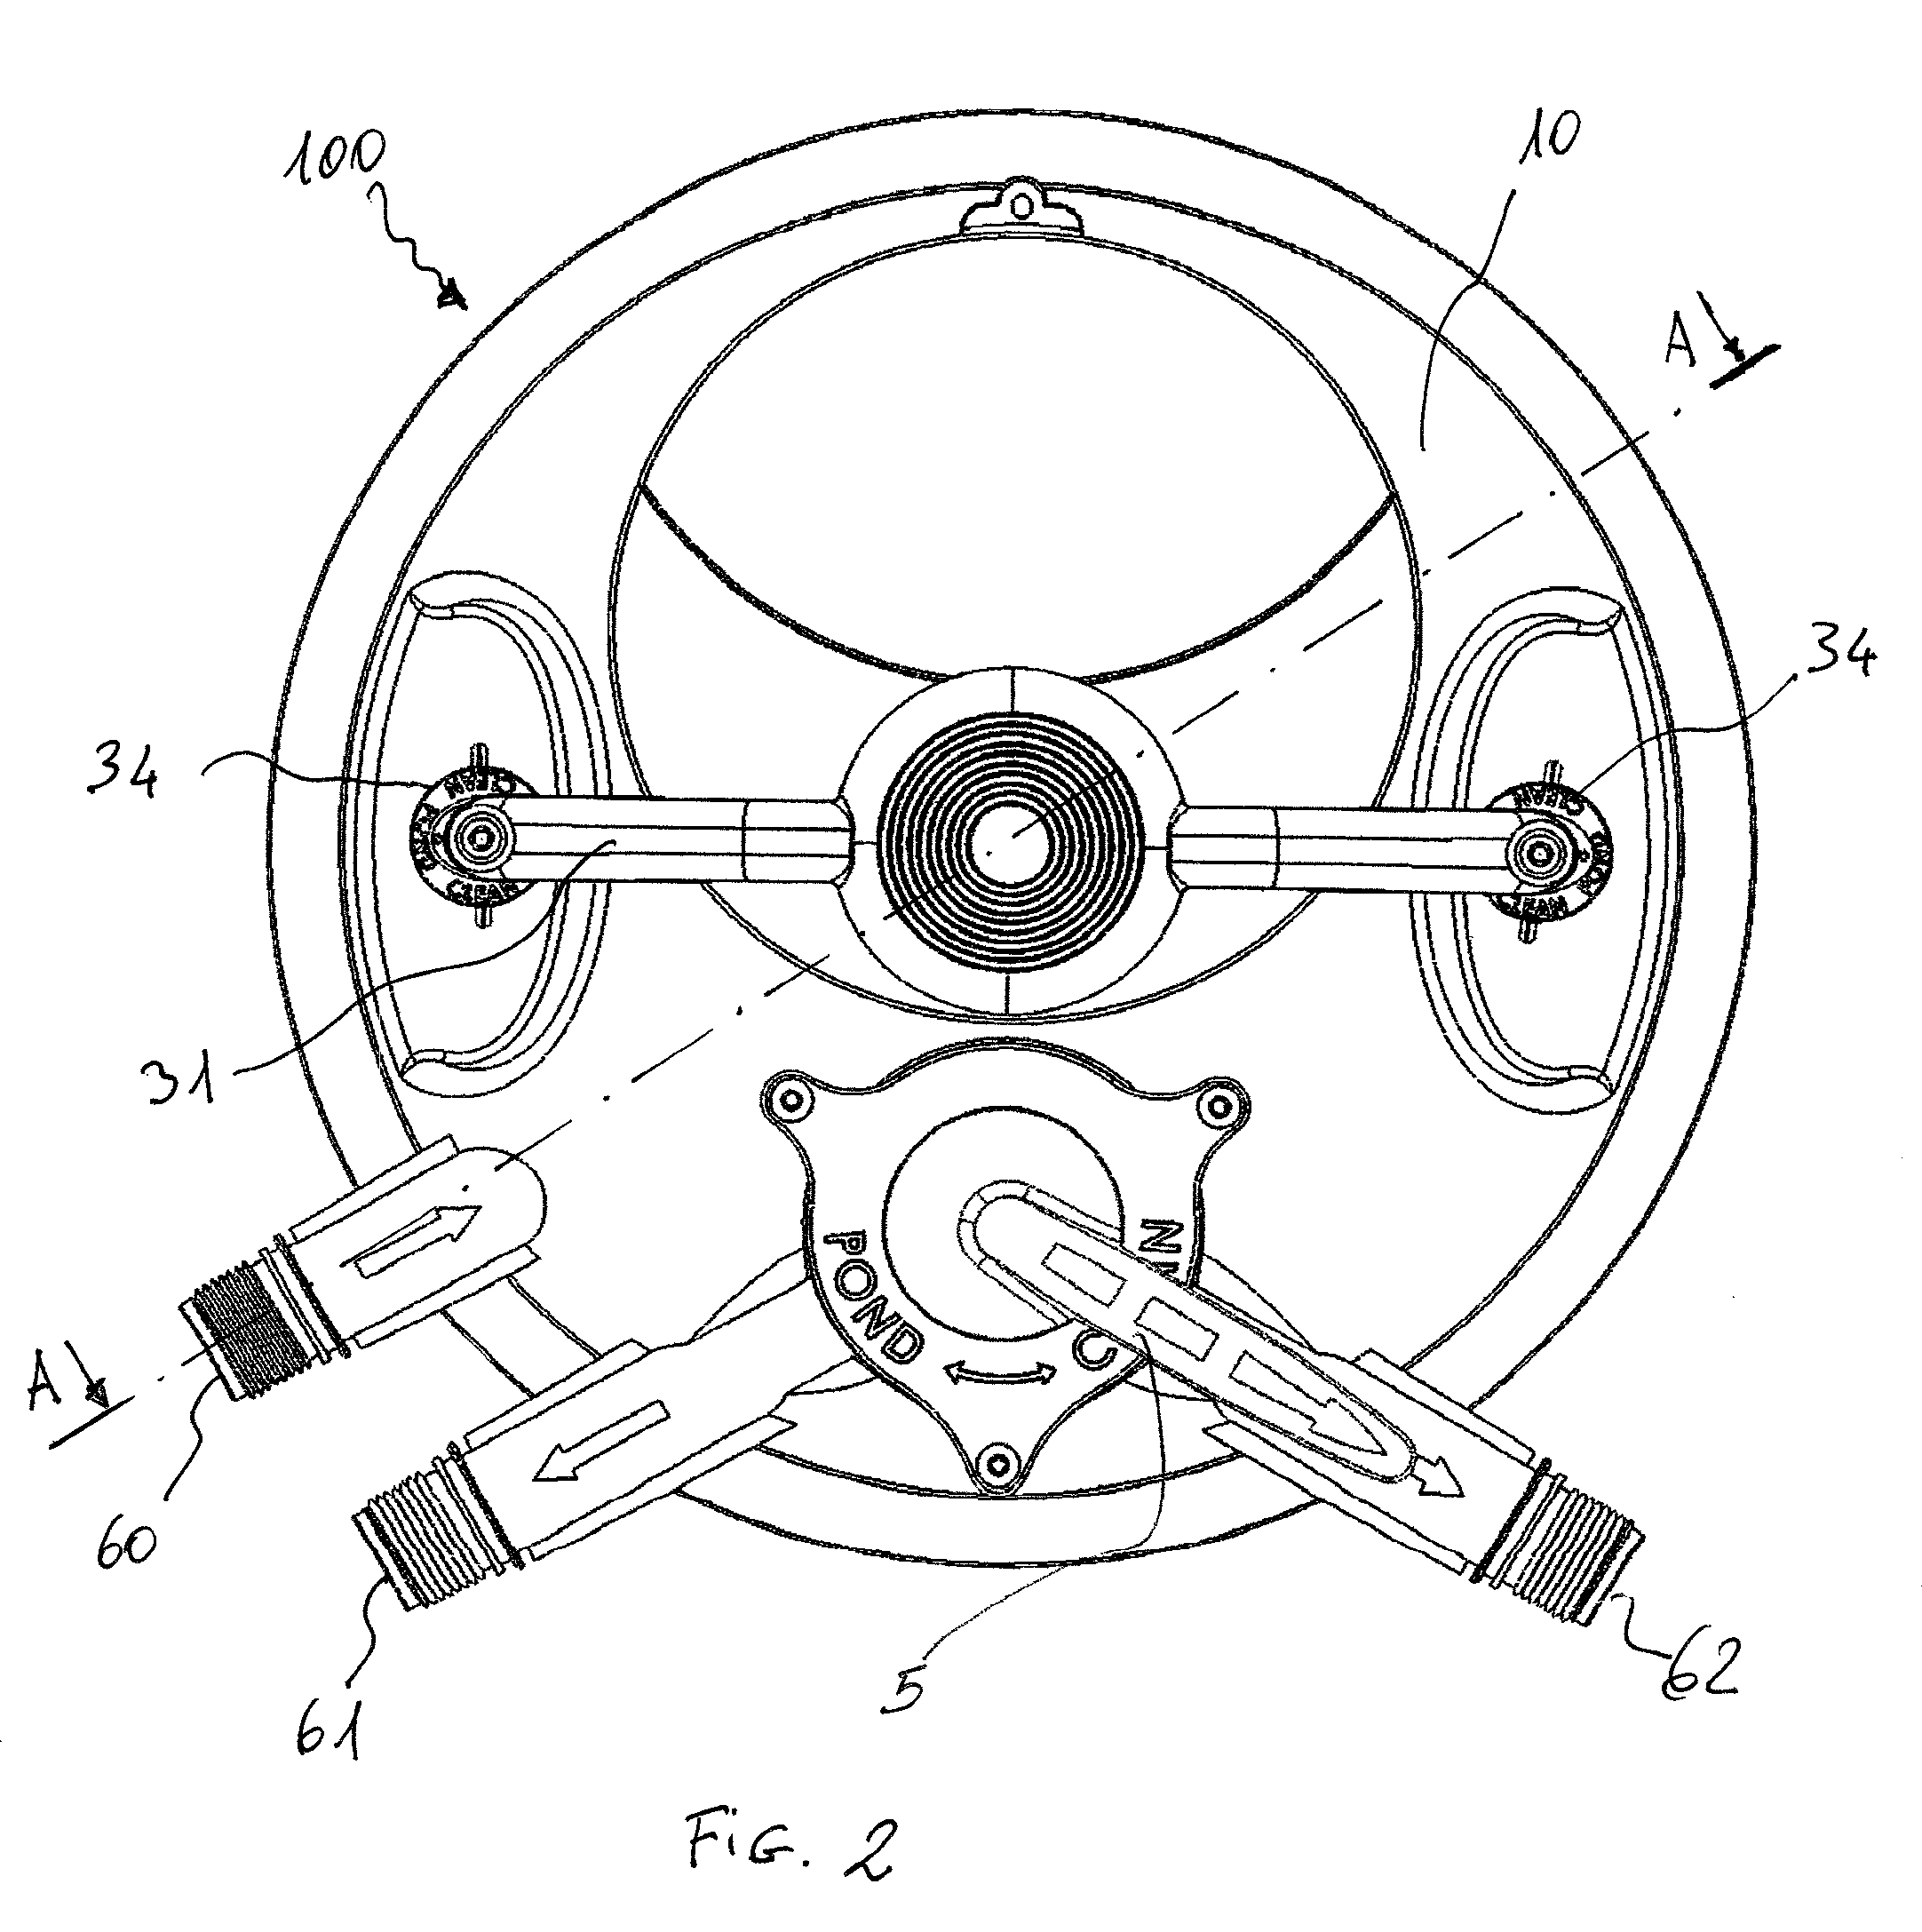 Filtering device for ponds and the like